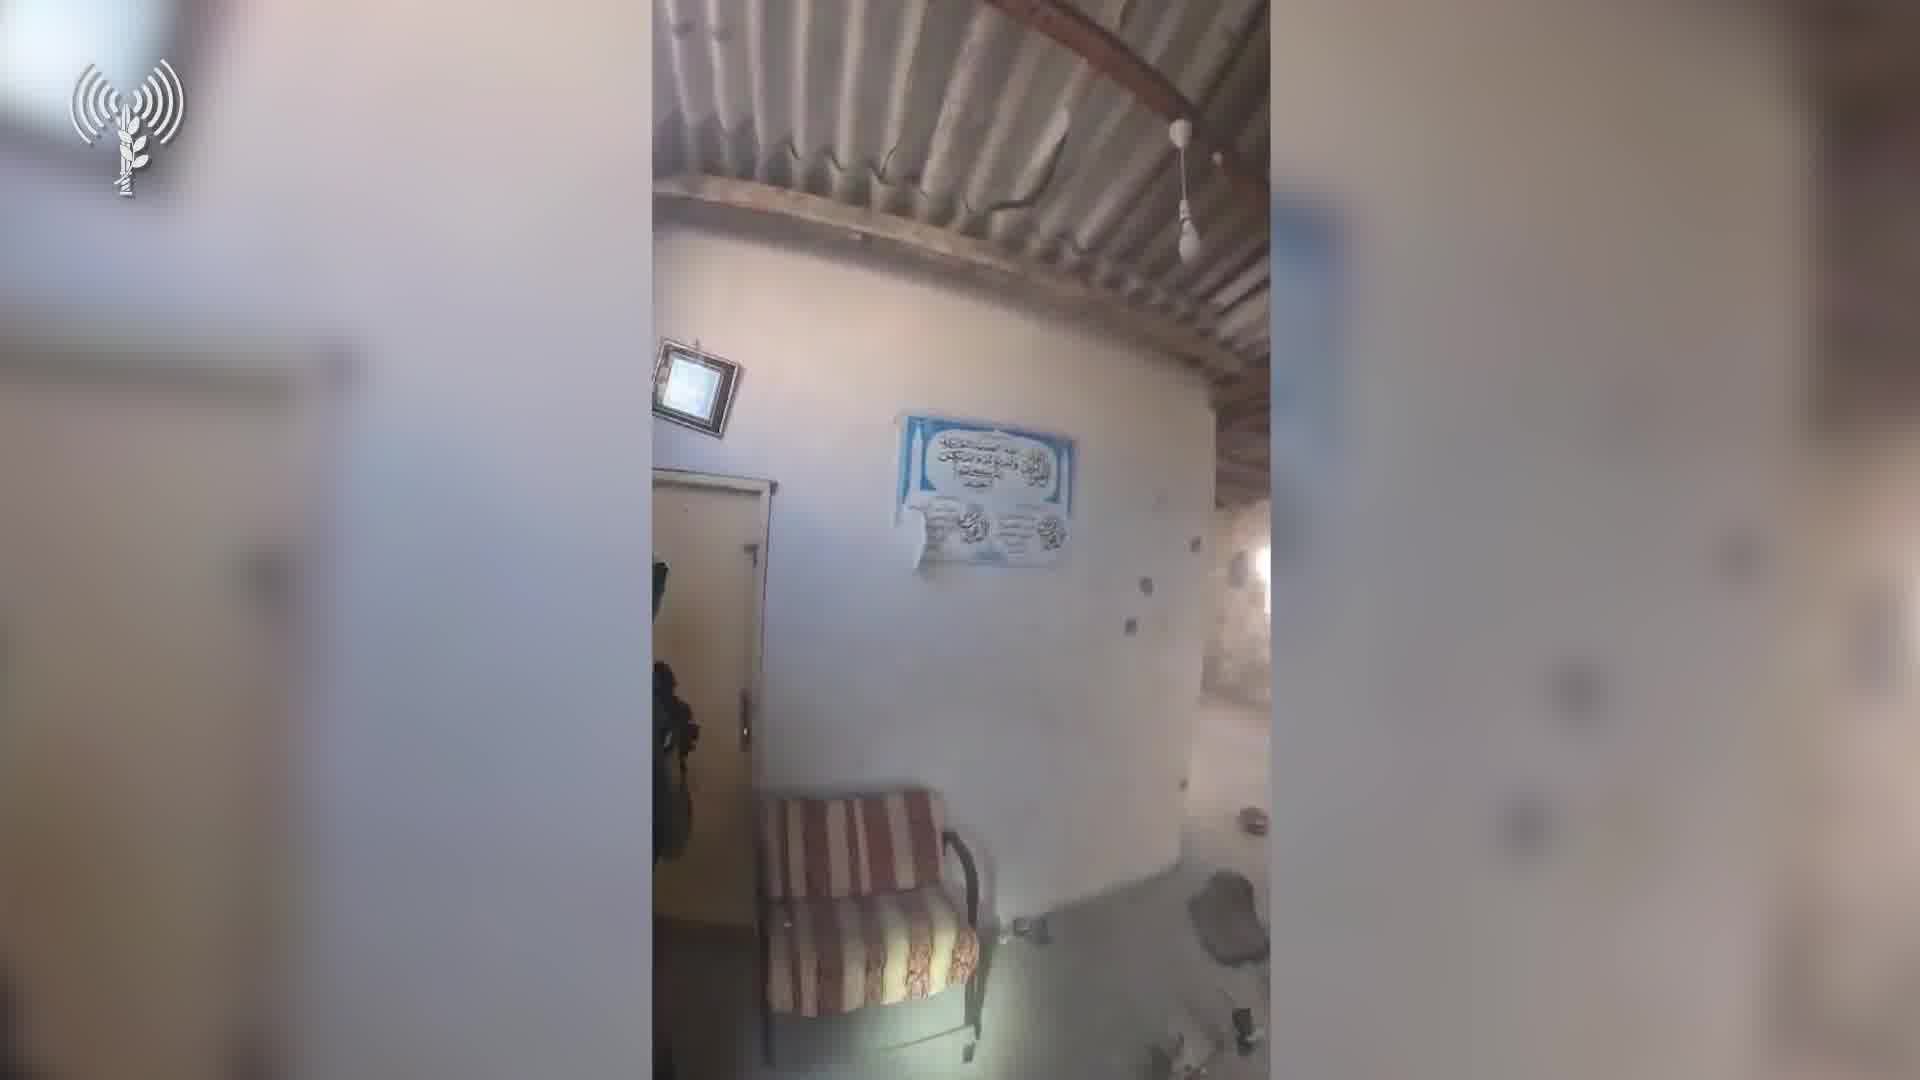 The Israeli military releases footage showing how Hamas smashed holes in walls of homes in southern Gaza's Rafah to allow terror operatives to move between buildings to fight Israeli army troops.The Israeli army says troops of the Nahal Brigade found several such holes in dense neighborhoods of Rafah